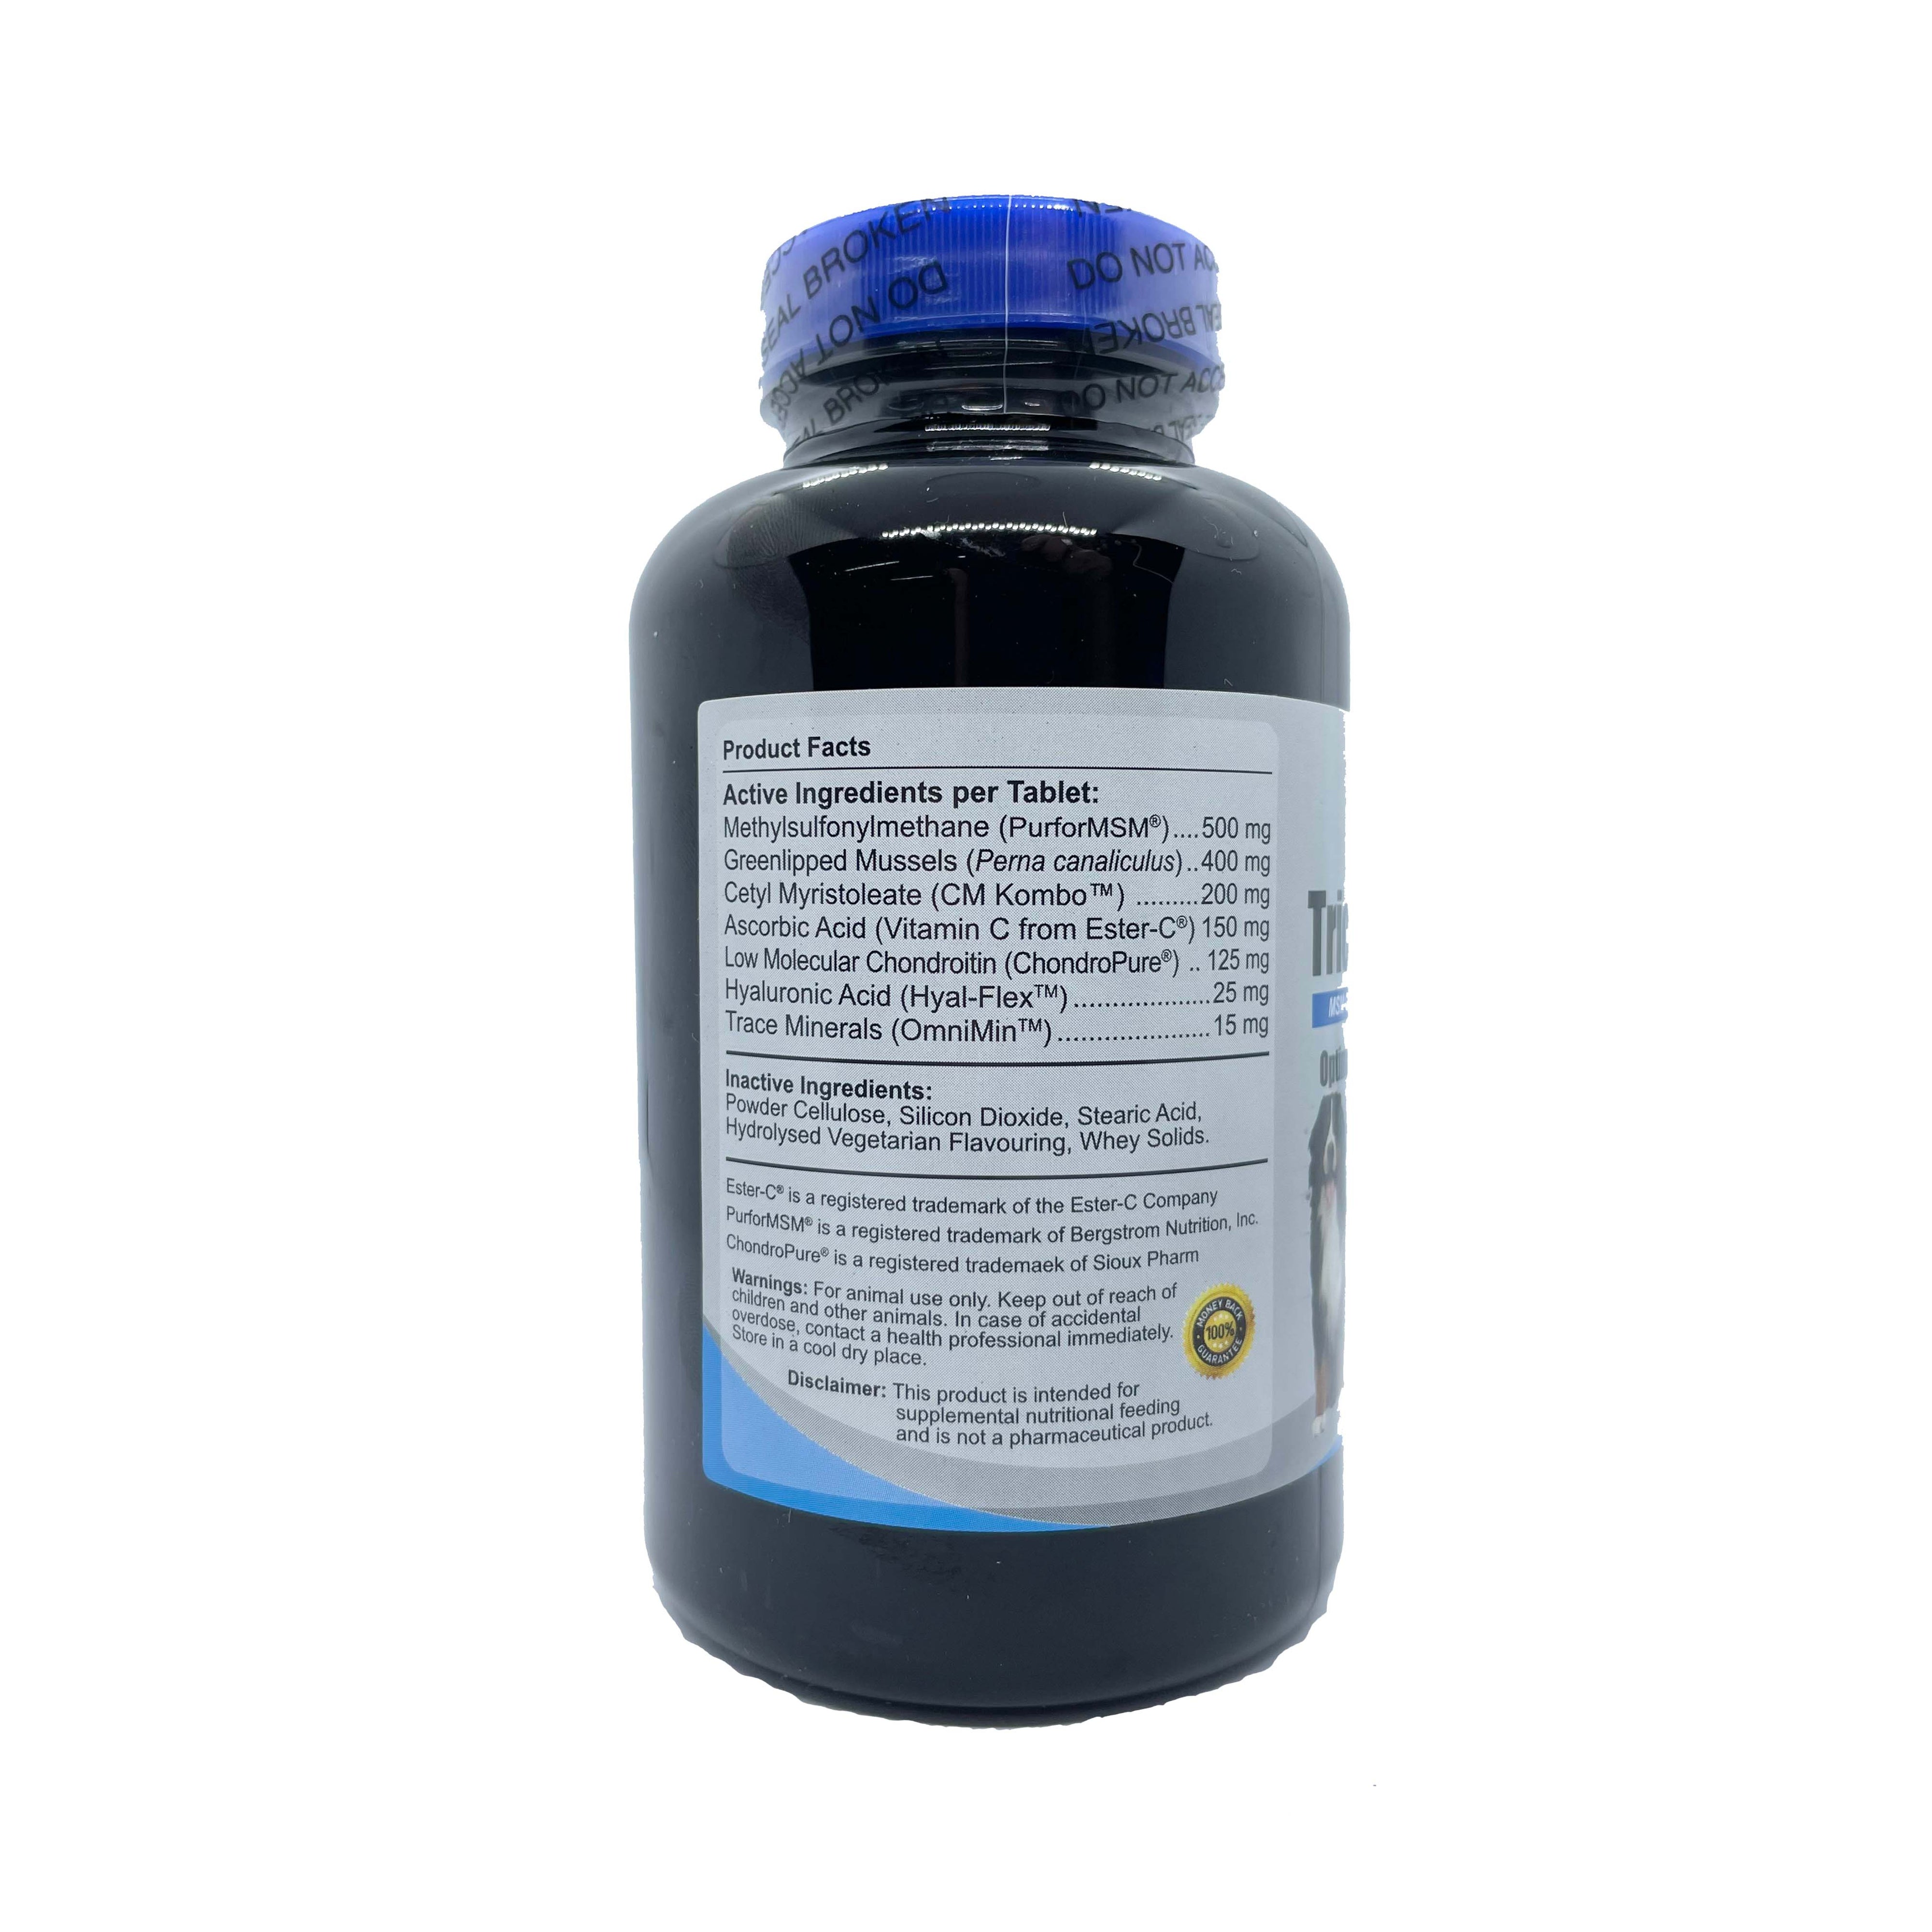 Vetra Animal Health Tricosamine GLM (Greenlipped Mussels) Joint Supplement (Hypoallergenic)